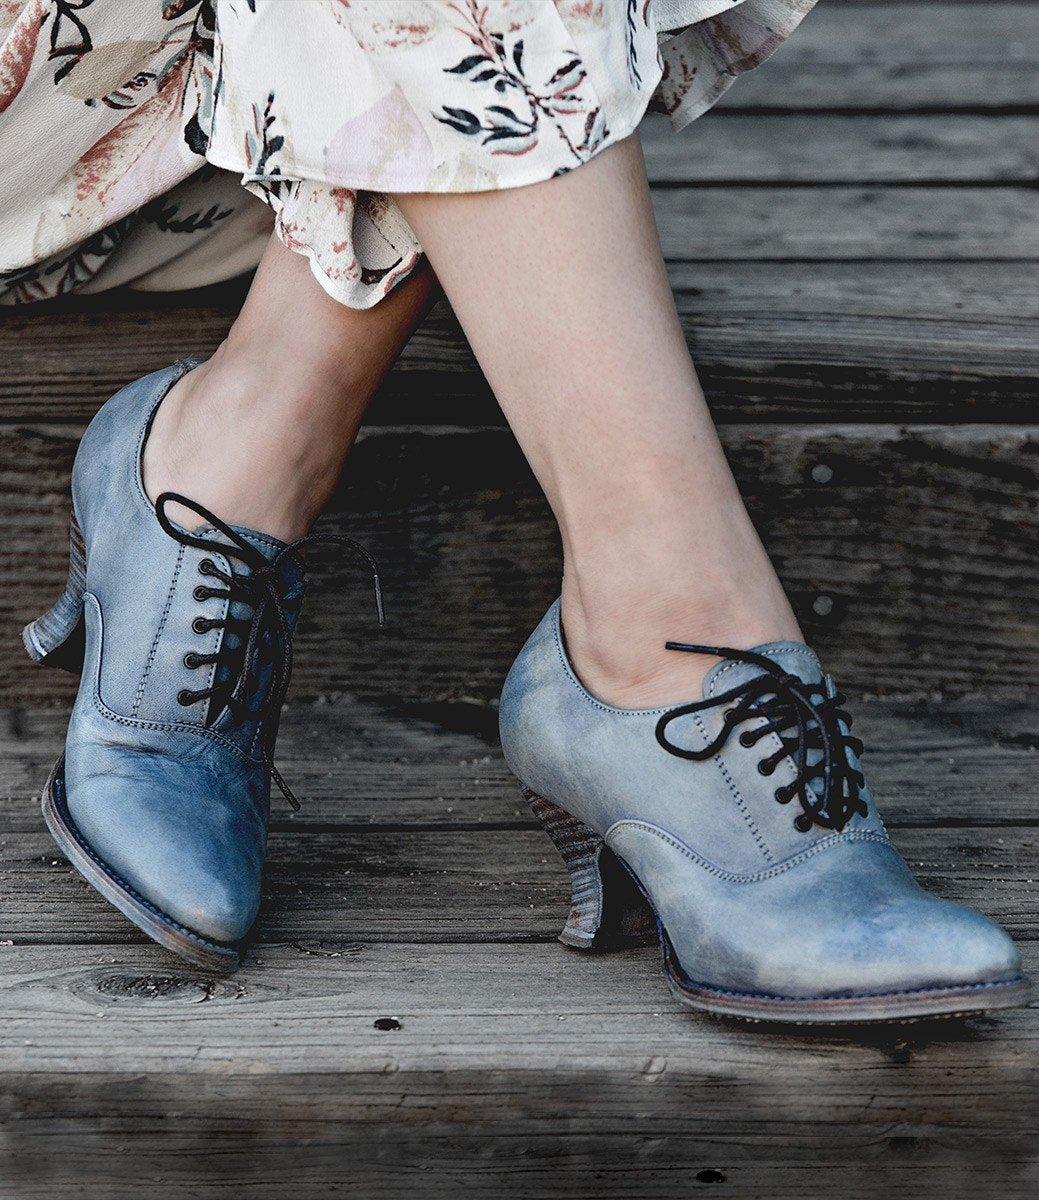 Janet Victorian Style Shoes in Steel Blue